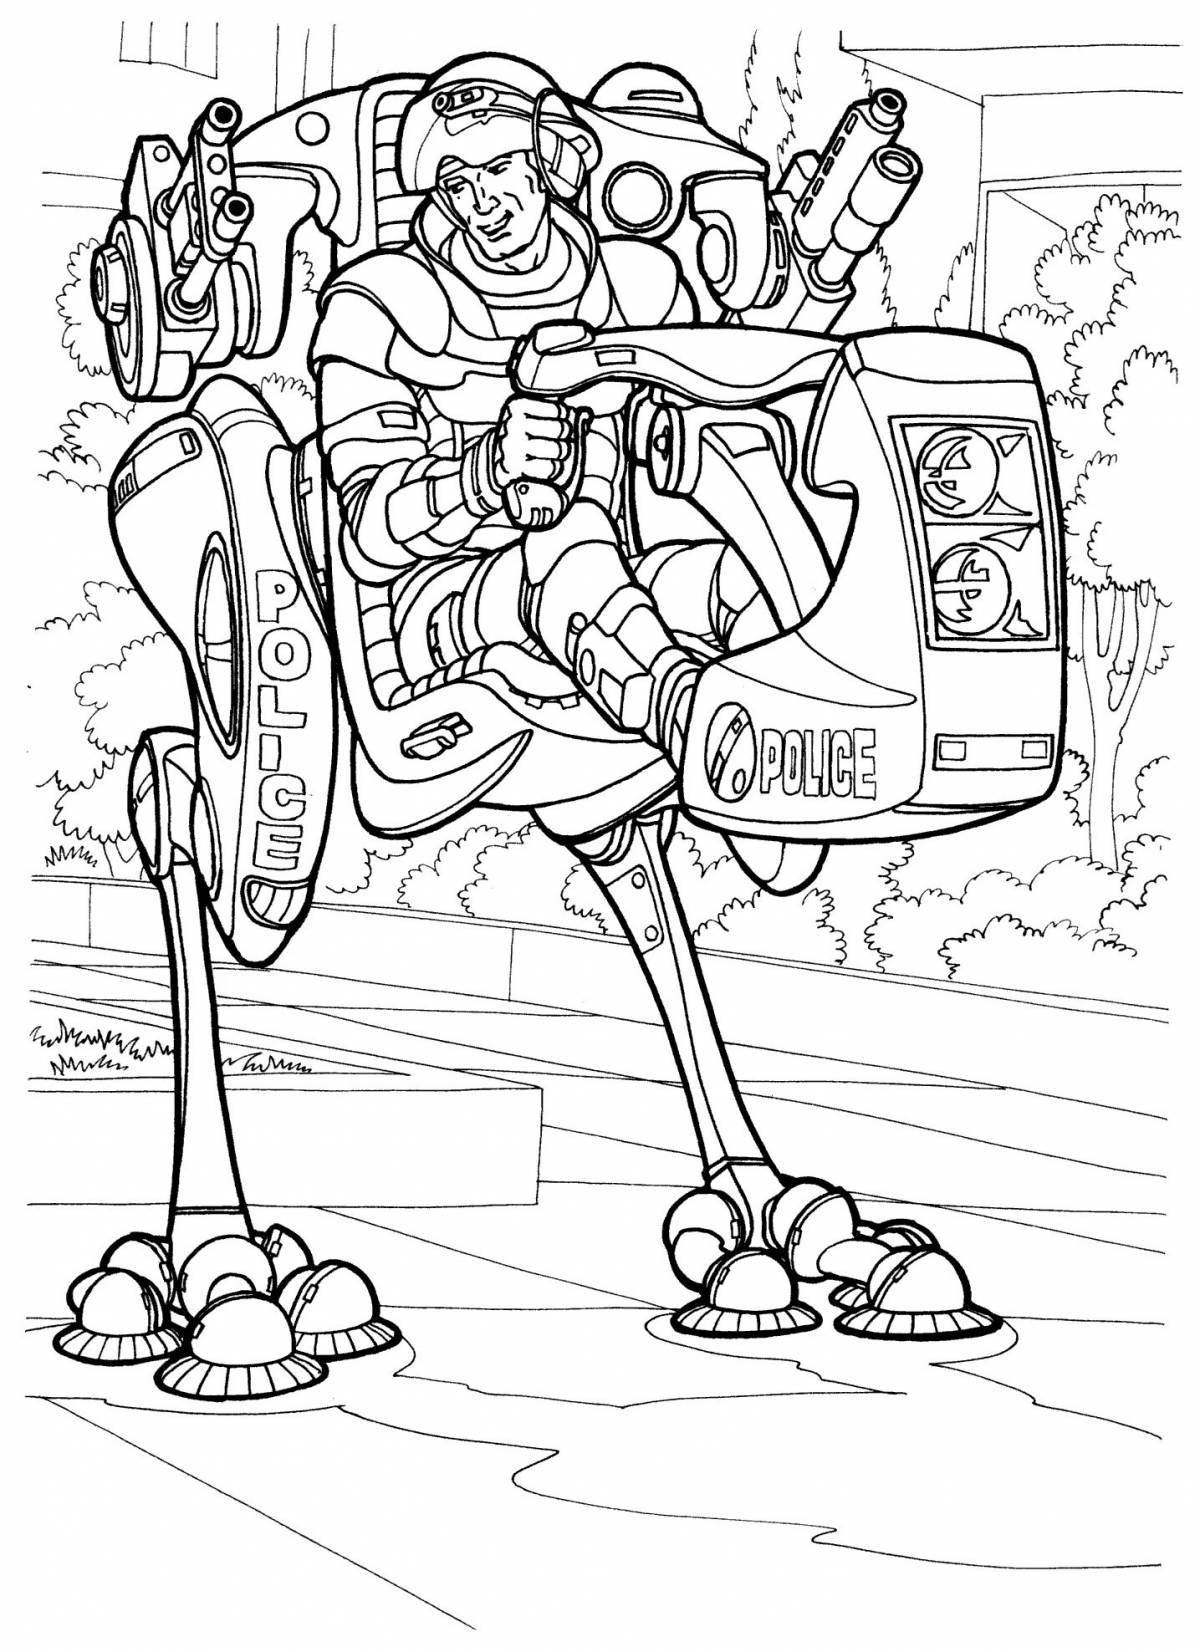 Gorgeous police robot coloring book for kids